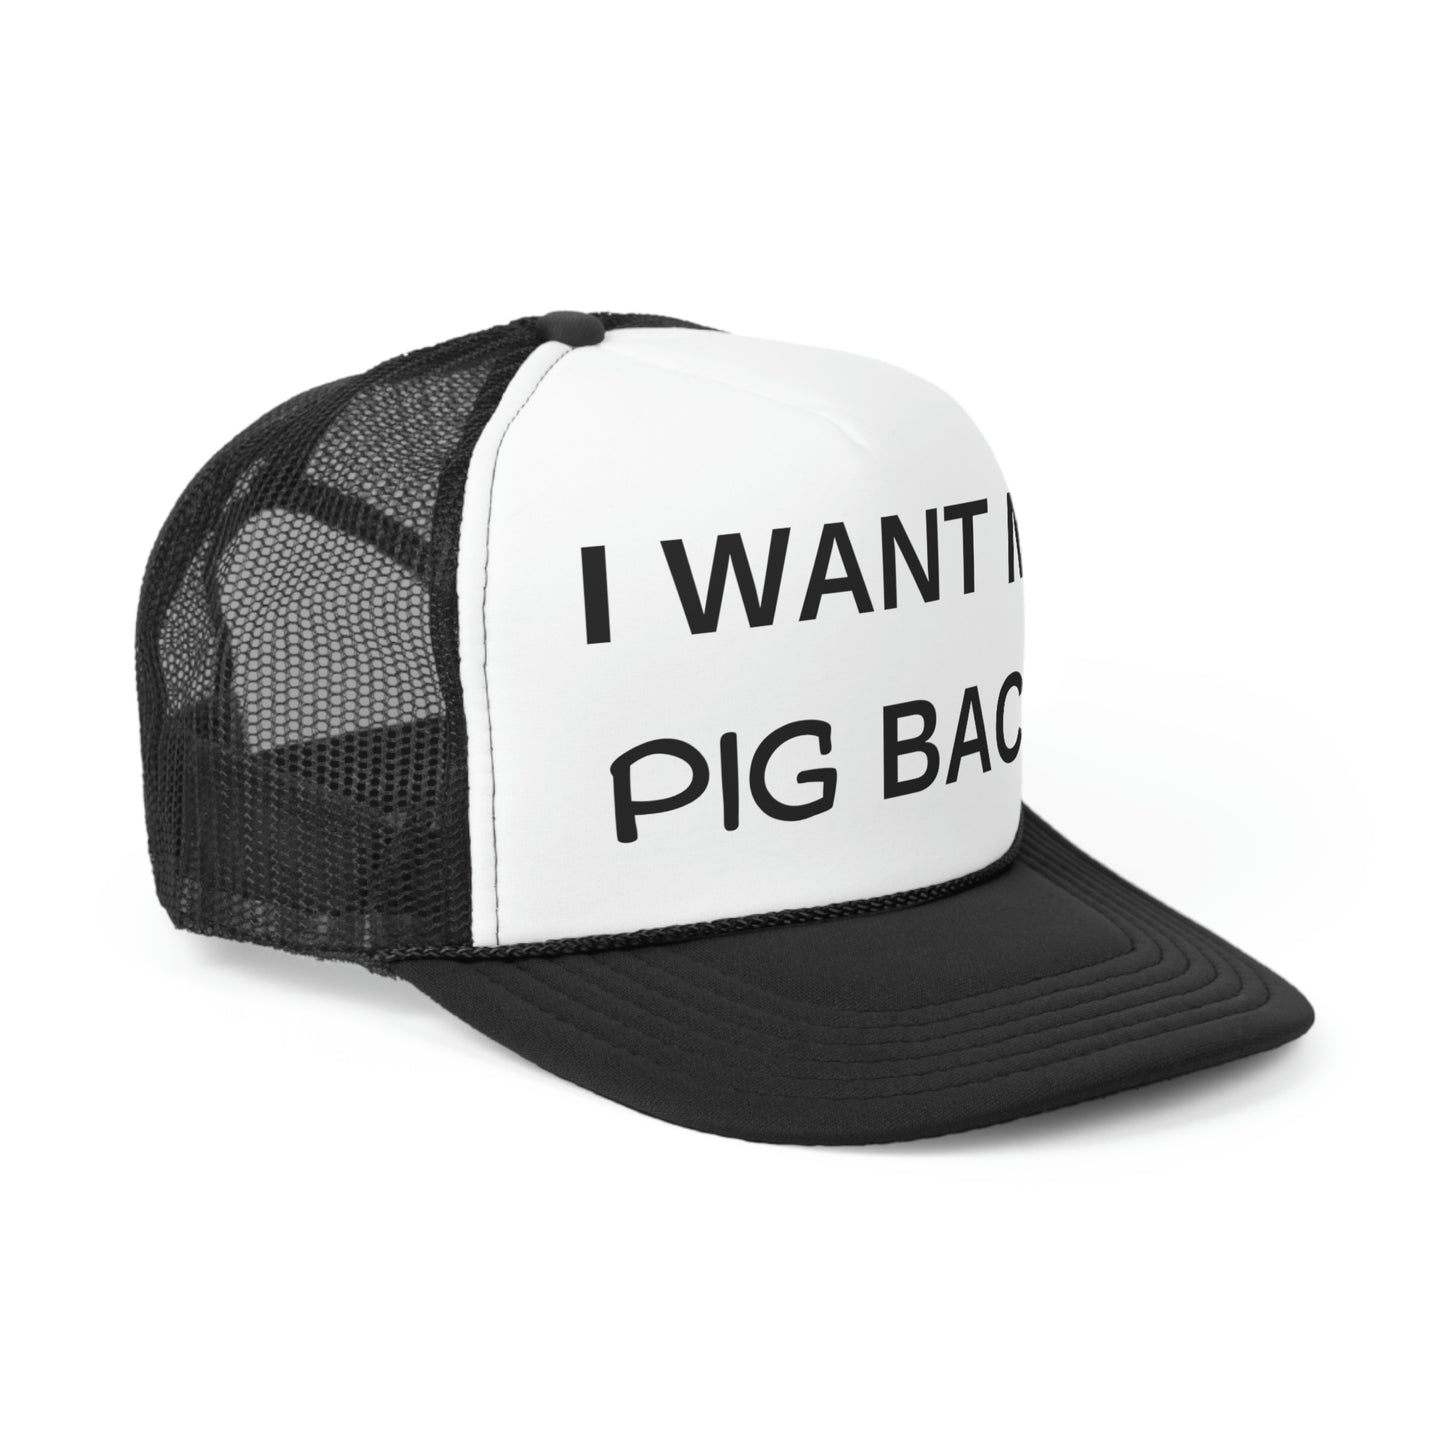 I Want My Pig Back (Special Order)